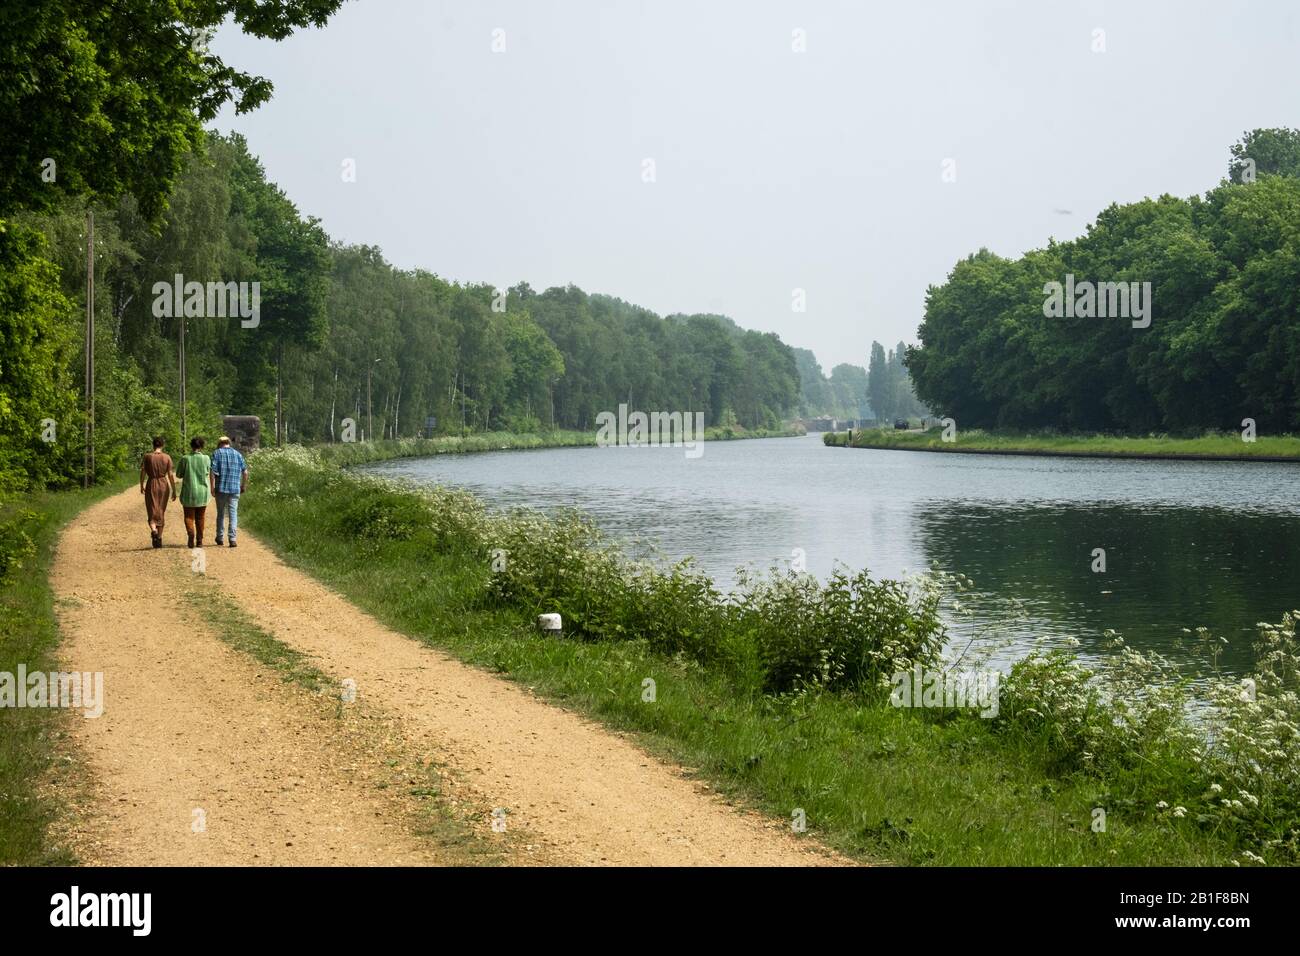 People are walking on a path along the Bocholt-Herentals canal in Mol. This peaceful area of the canal is bordered by trees. Stock Photo